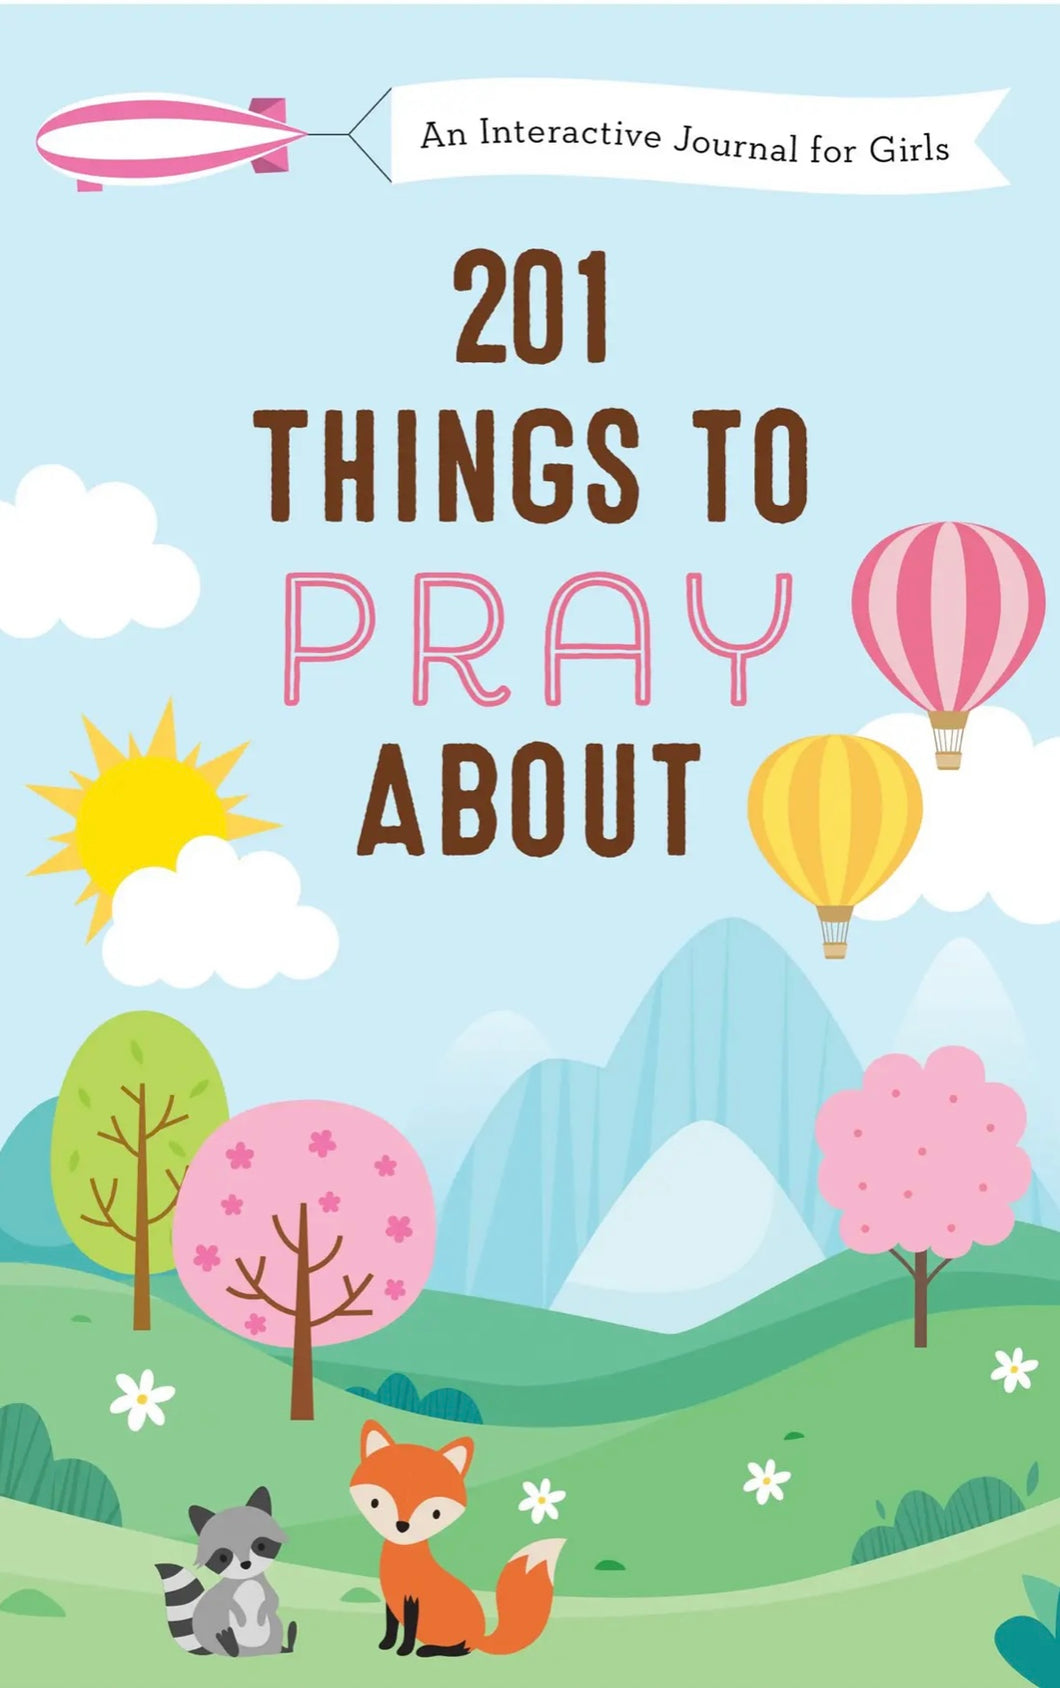 Barbour 201 Things to Pray About - An Interactive Journal